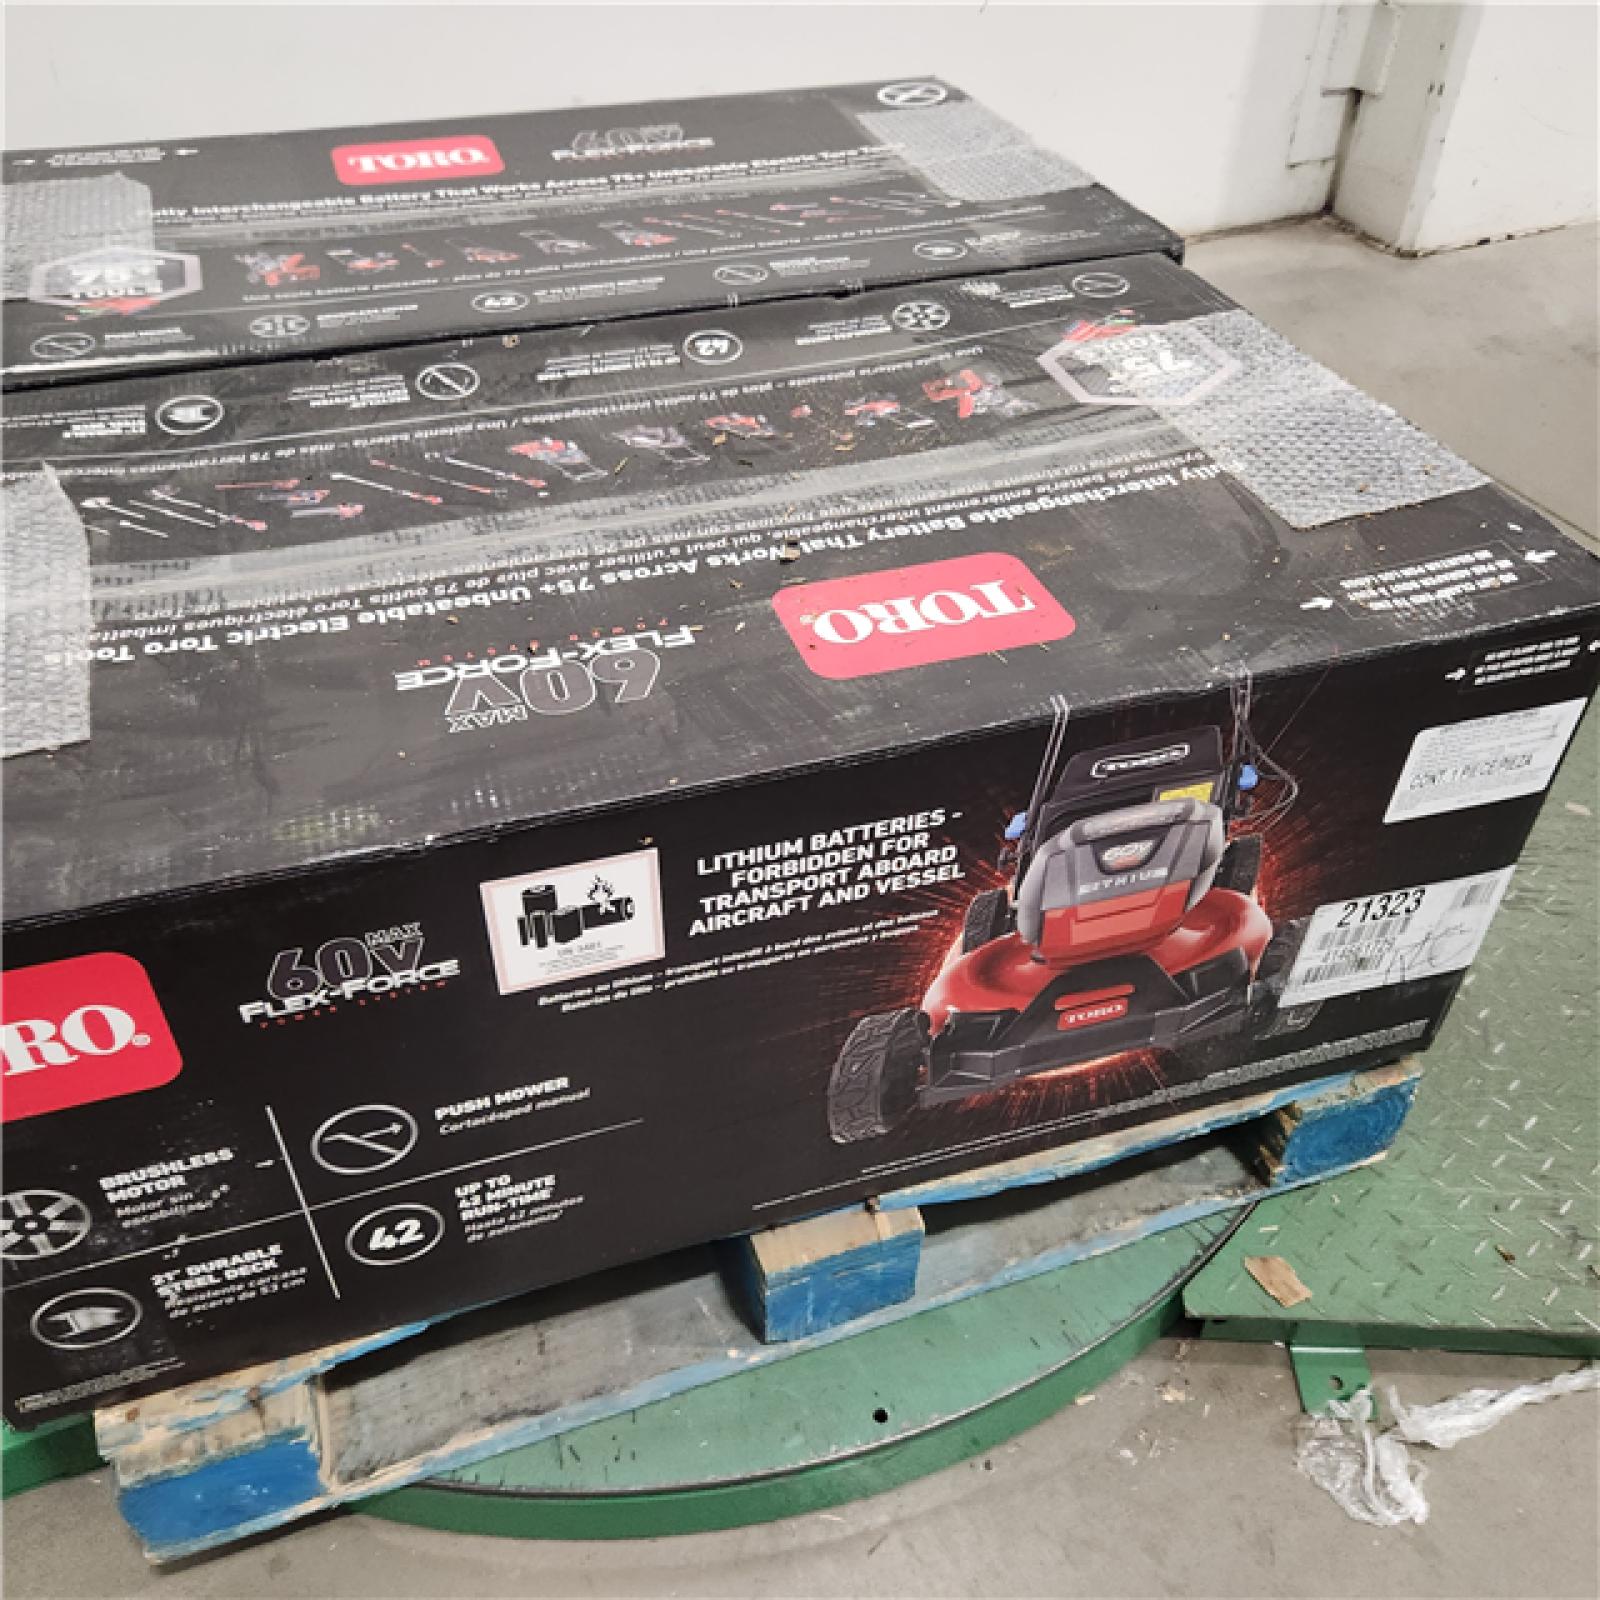 Dallas Location - NEW- Toro Recycler 60-volt Max 21-in  Lawn Mower 4 Ah (1-Battery and Charger Included)Lot Of 2